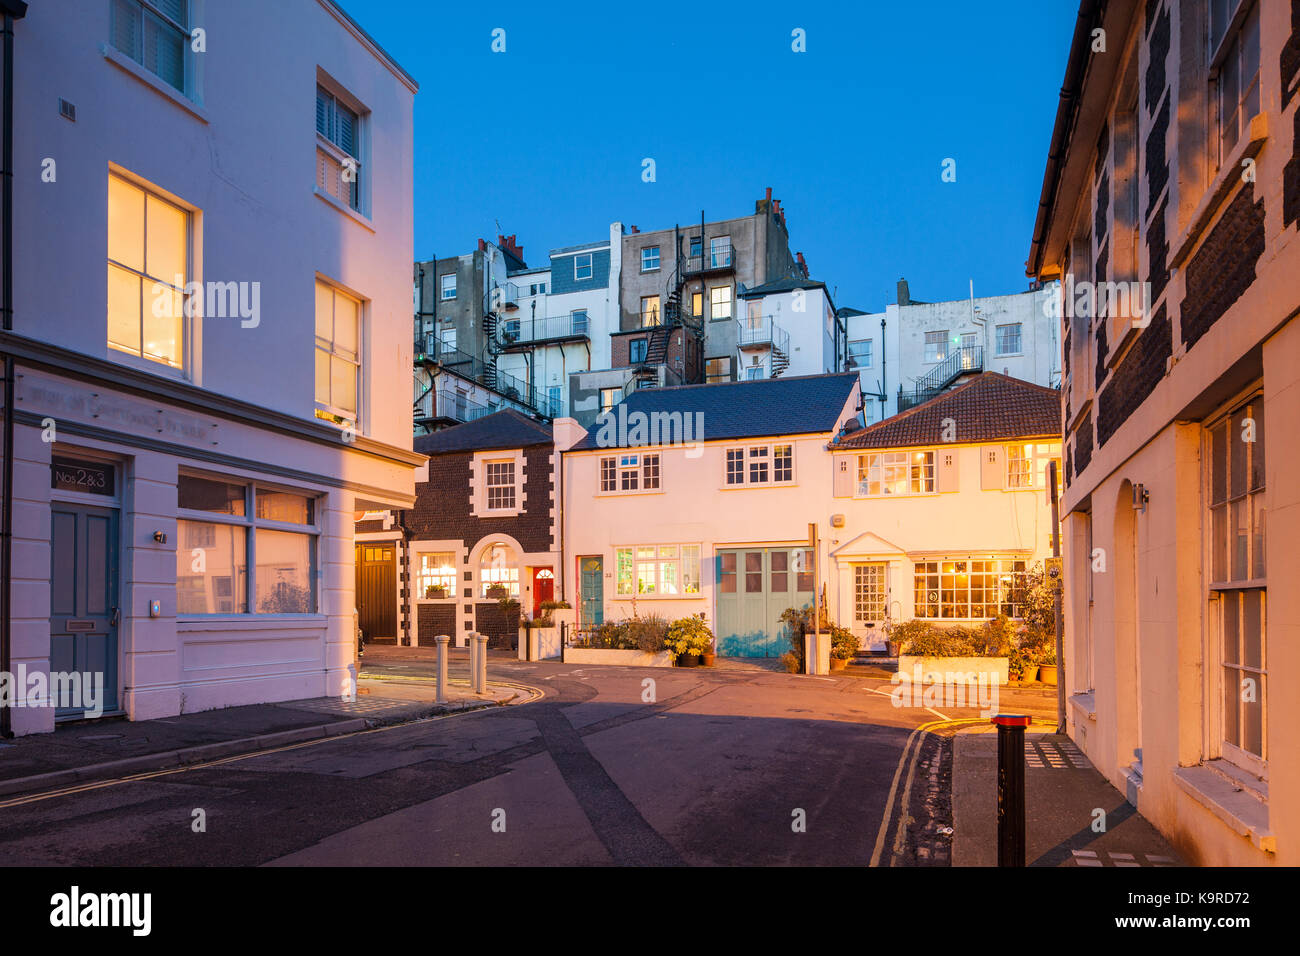 Abend in Hove, East Sussex, England. Stockfoto